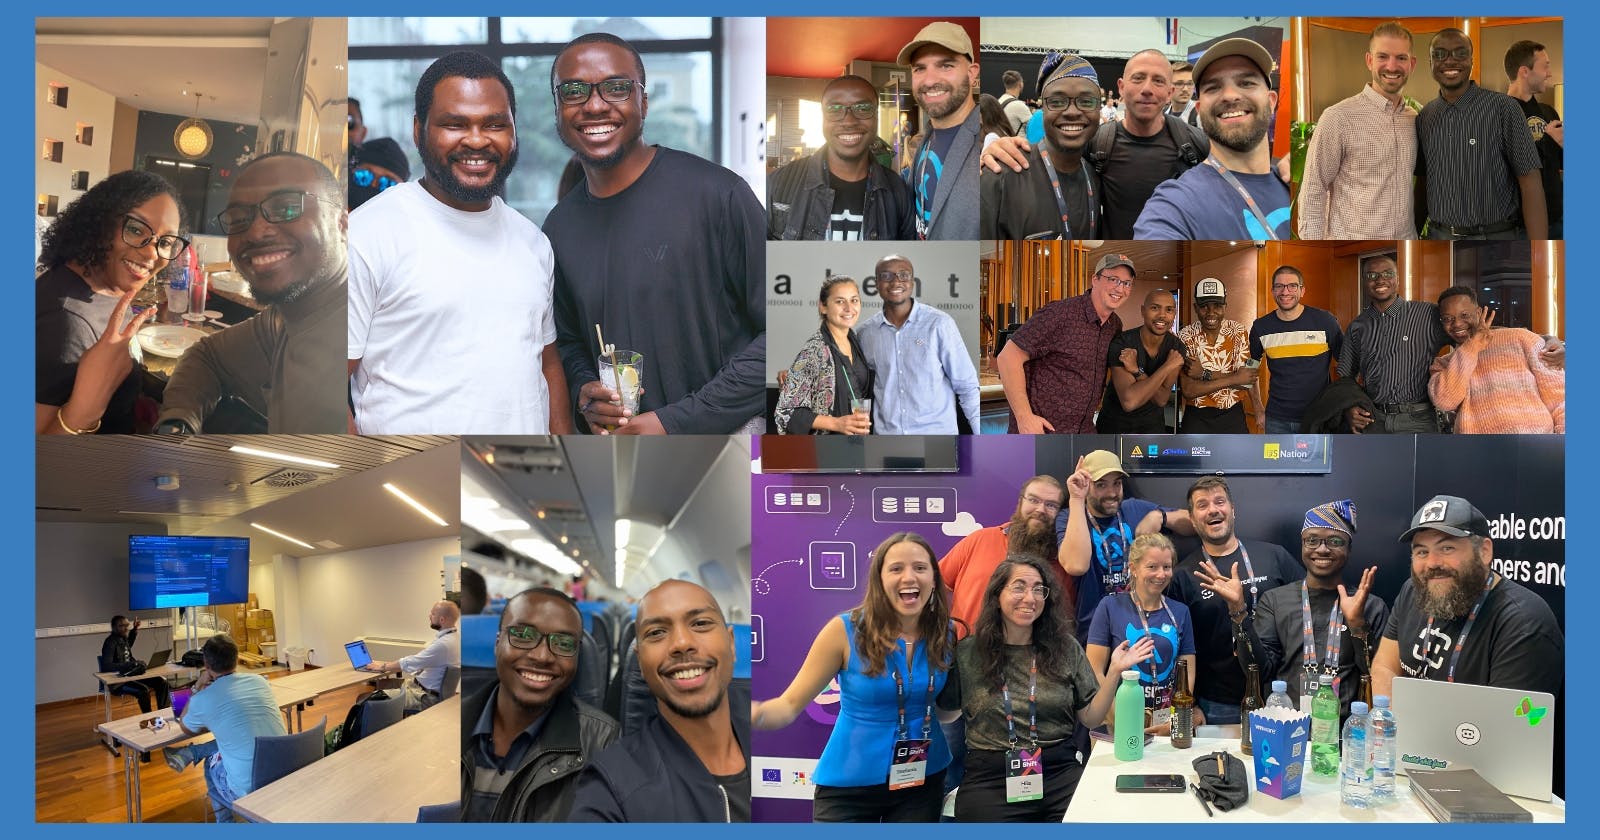 A collage with some images of Bolaji and some friends/colleagues at different developer conferences.